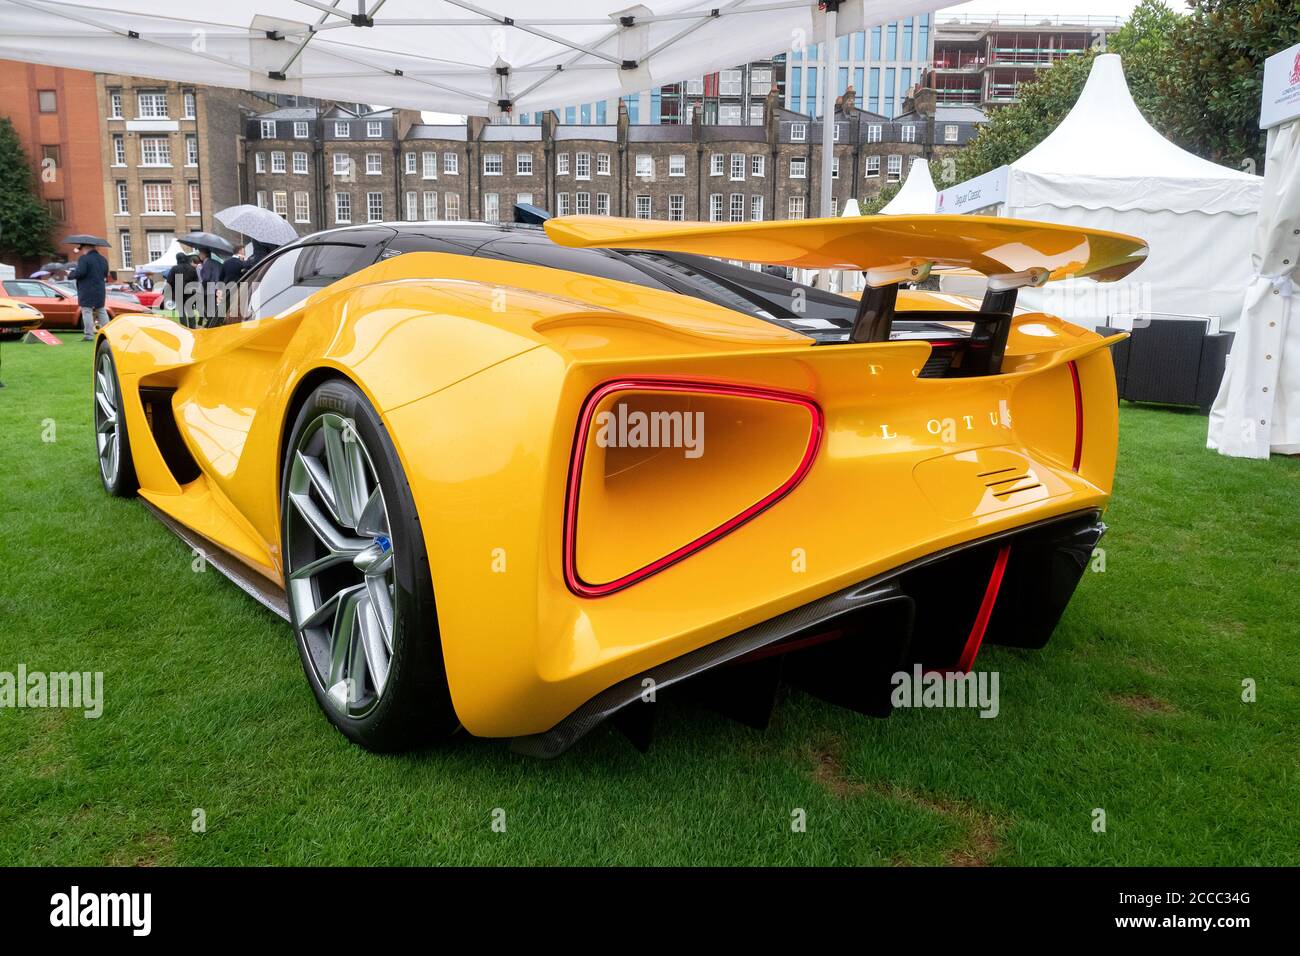 Lotus Evija Hyper car at the 2020 London Concours at te Honourable Artillery Company in the City of London UK Stock Photo